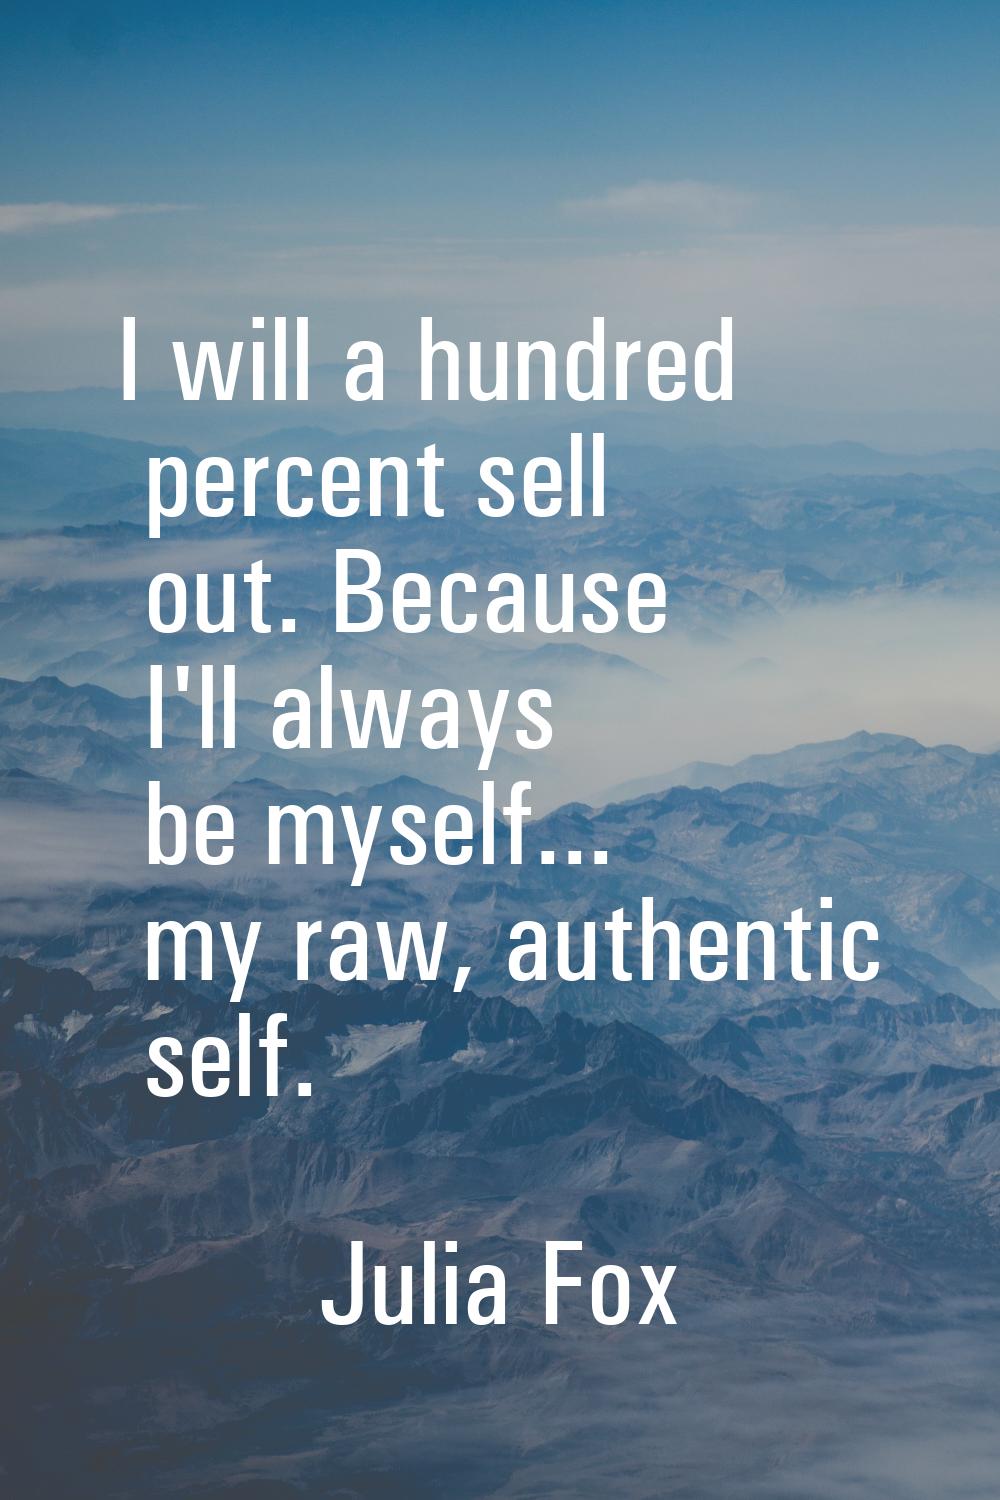 I will a hundred percent sell out. Because I'll always be myself... my raw, authentic self.